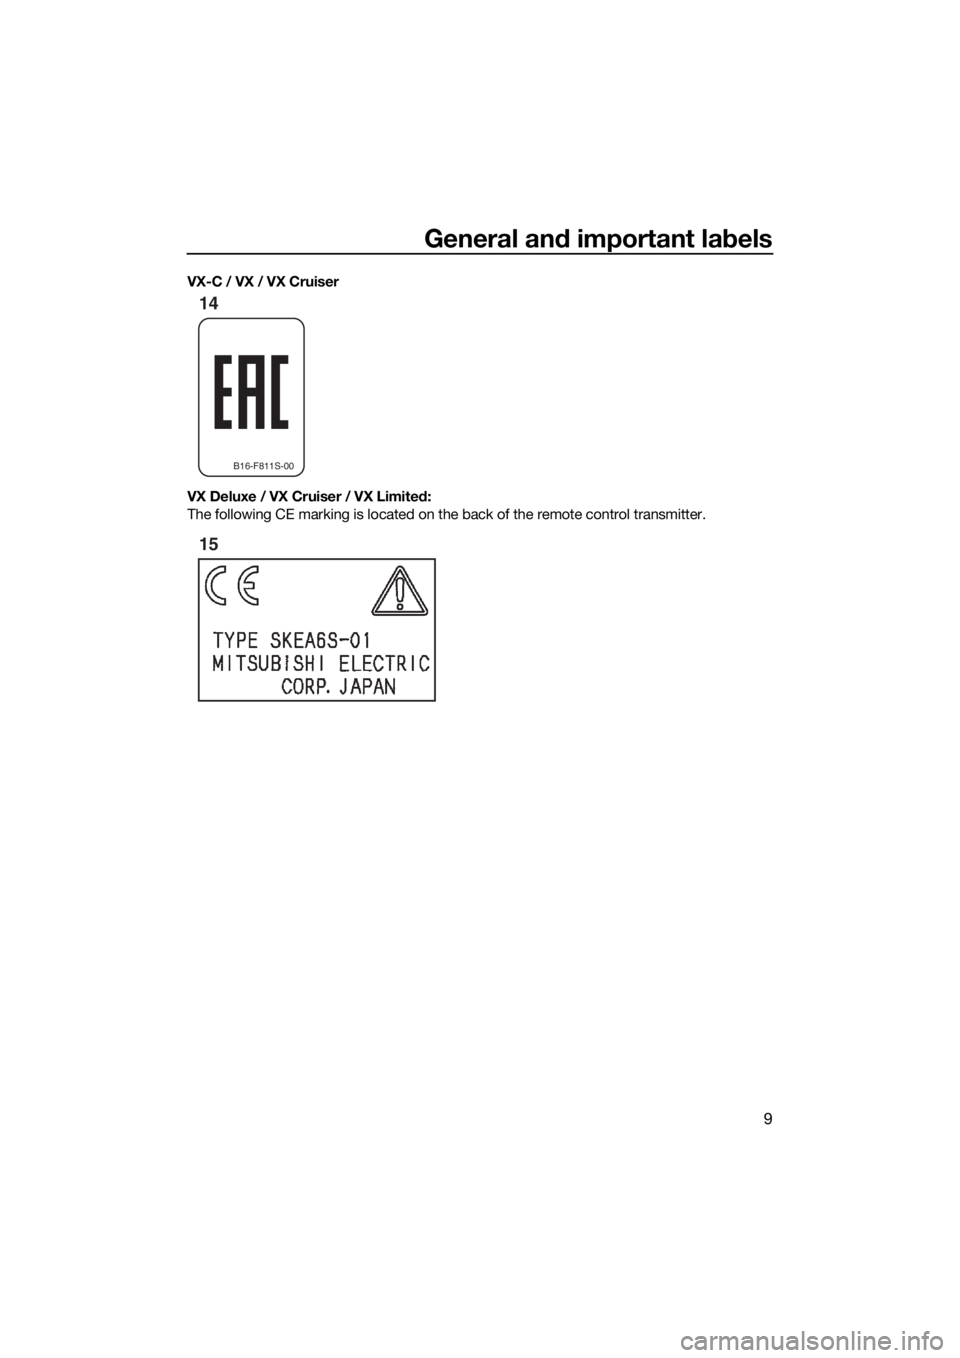 YAMAHA VX 2019 User Guide General and important labels
9
VX-C / VX / VX Cruiser
VX Deluxe / VX Cruiser / VX Limited: 
The following CE marking is located on the back of the remote control transmitter.
B16-F811S-00
14
15
UF4G73